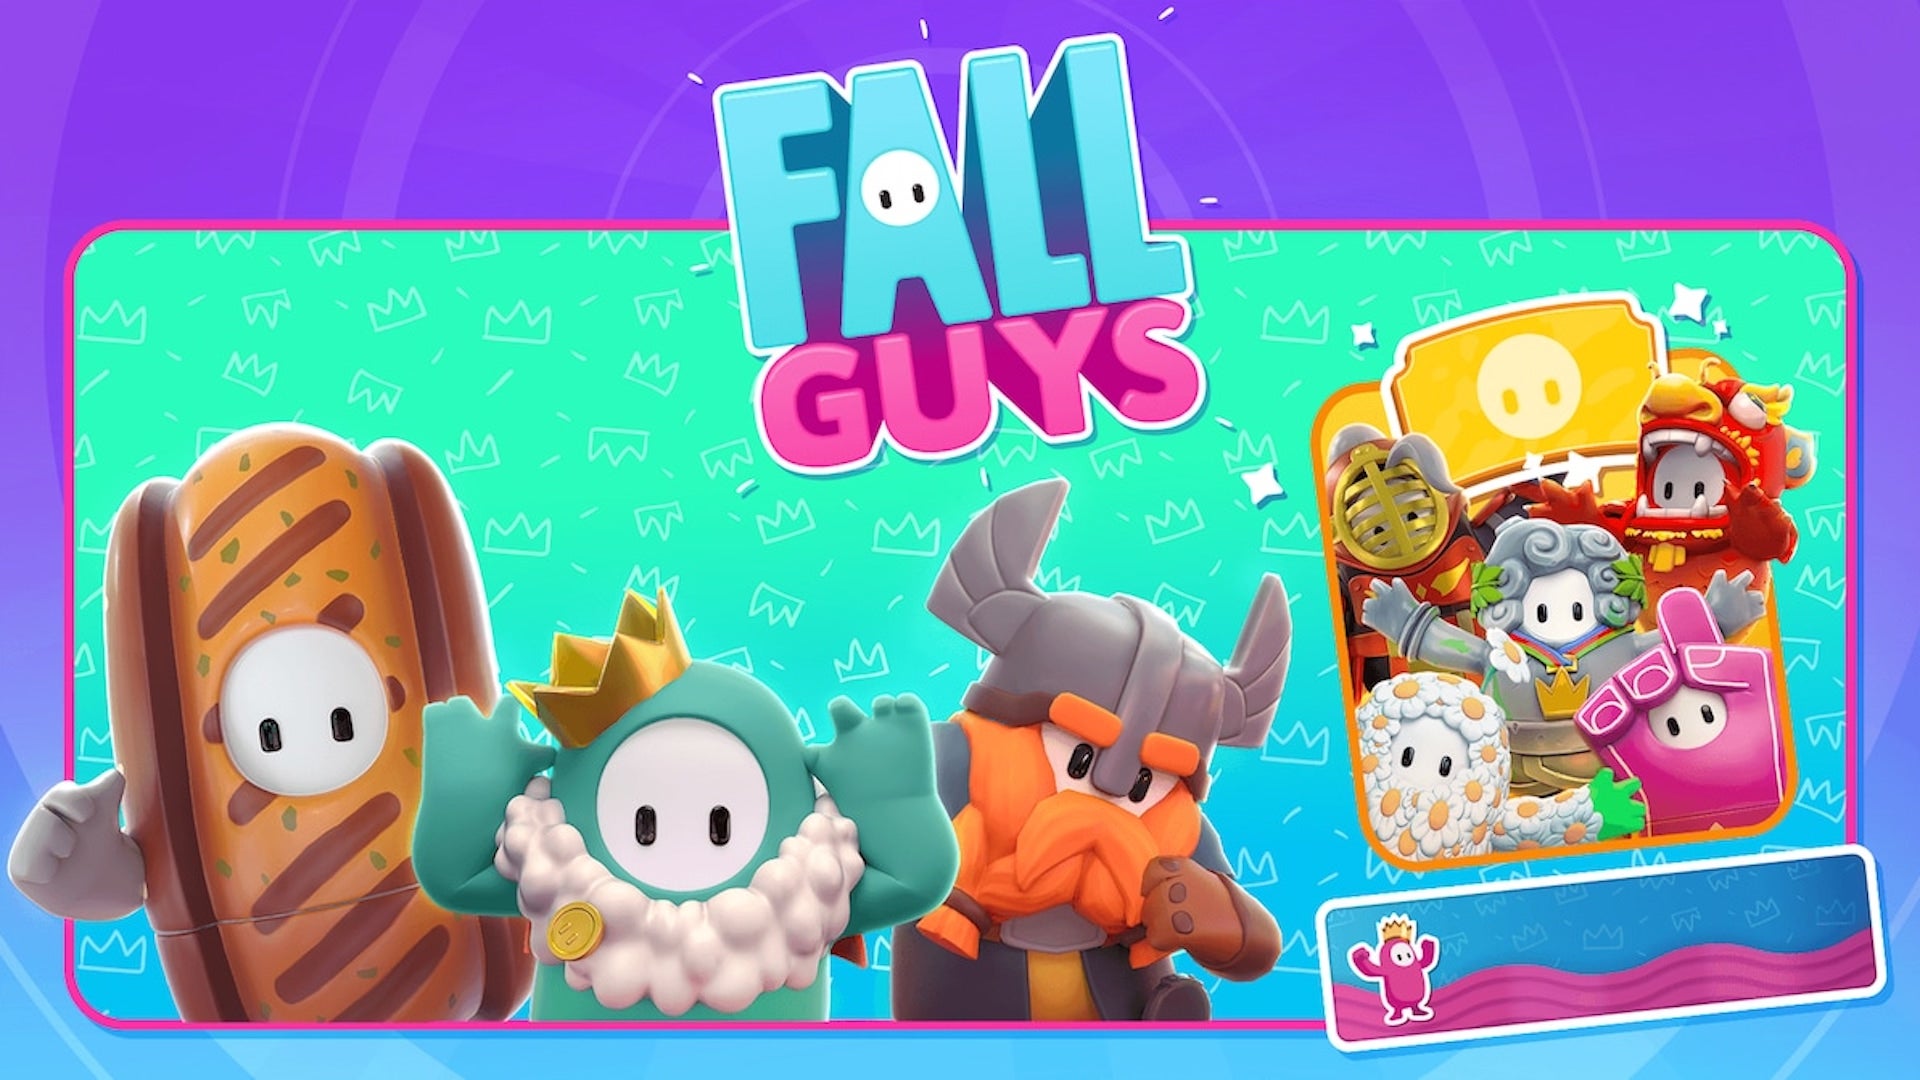  Fall Guys free to play release time estimate and what to expect from Season 1: Free For All